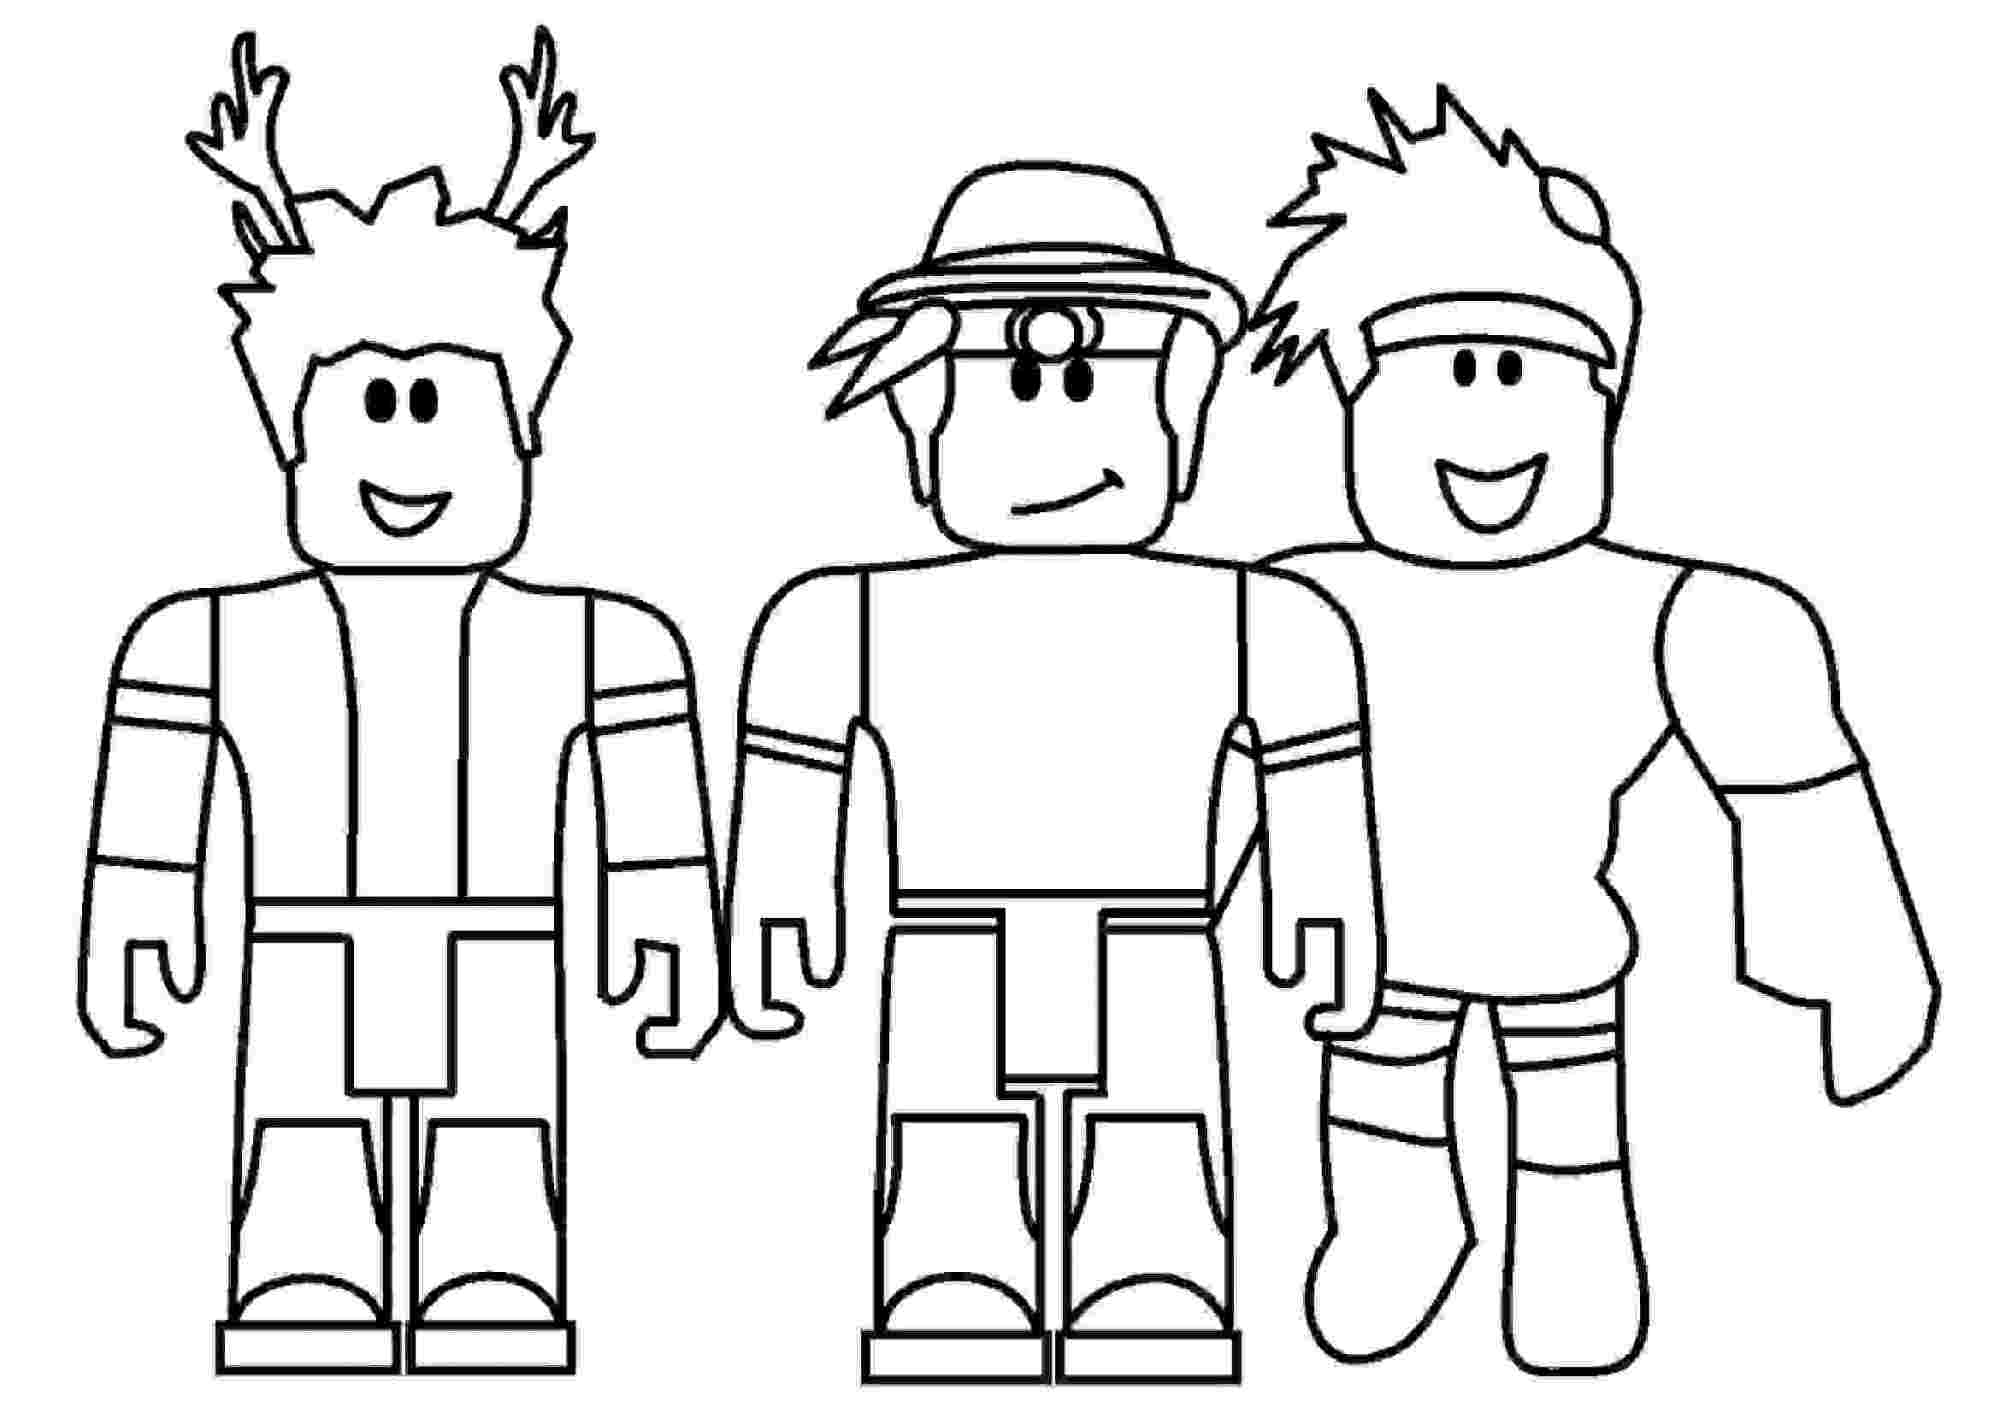 Roblox characters smiling Coloring Pages